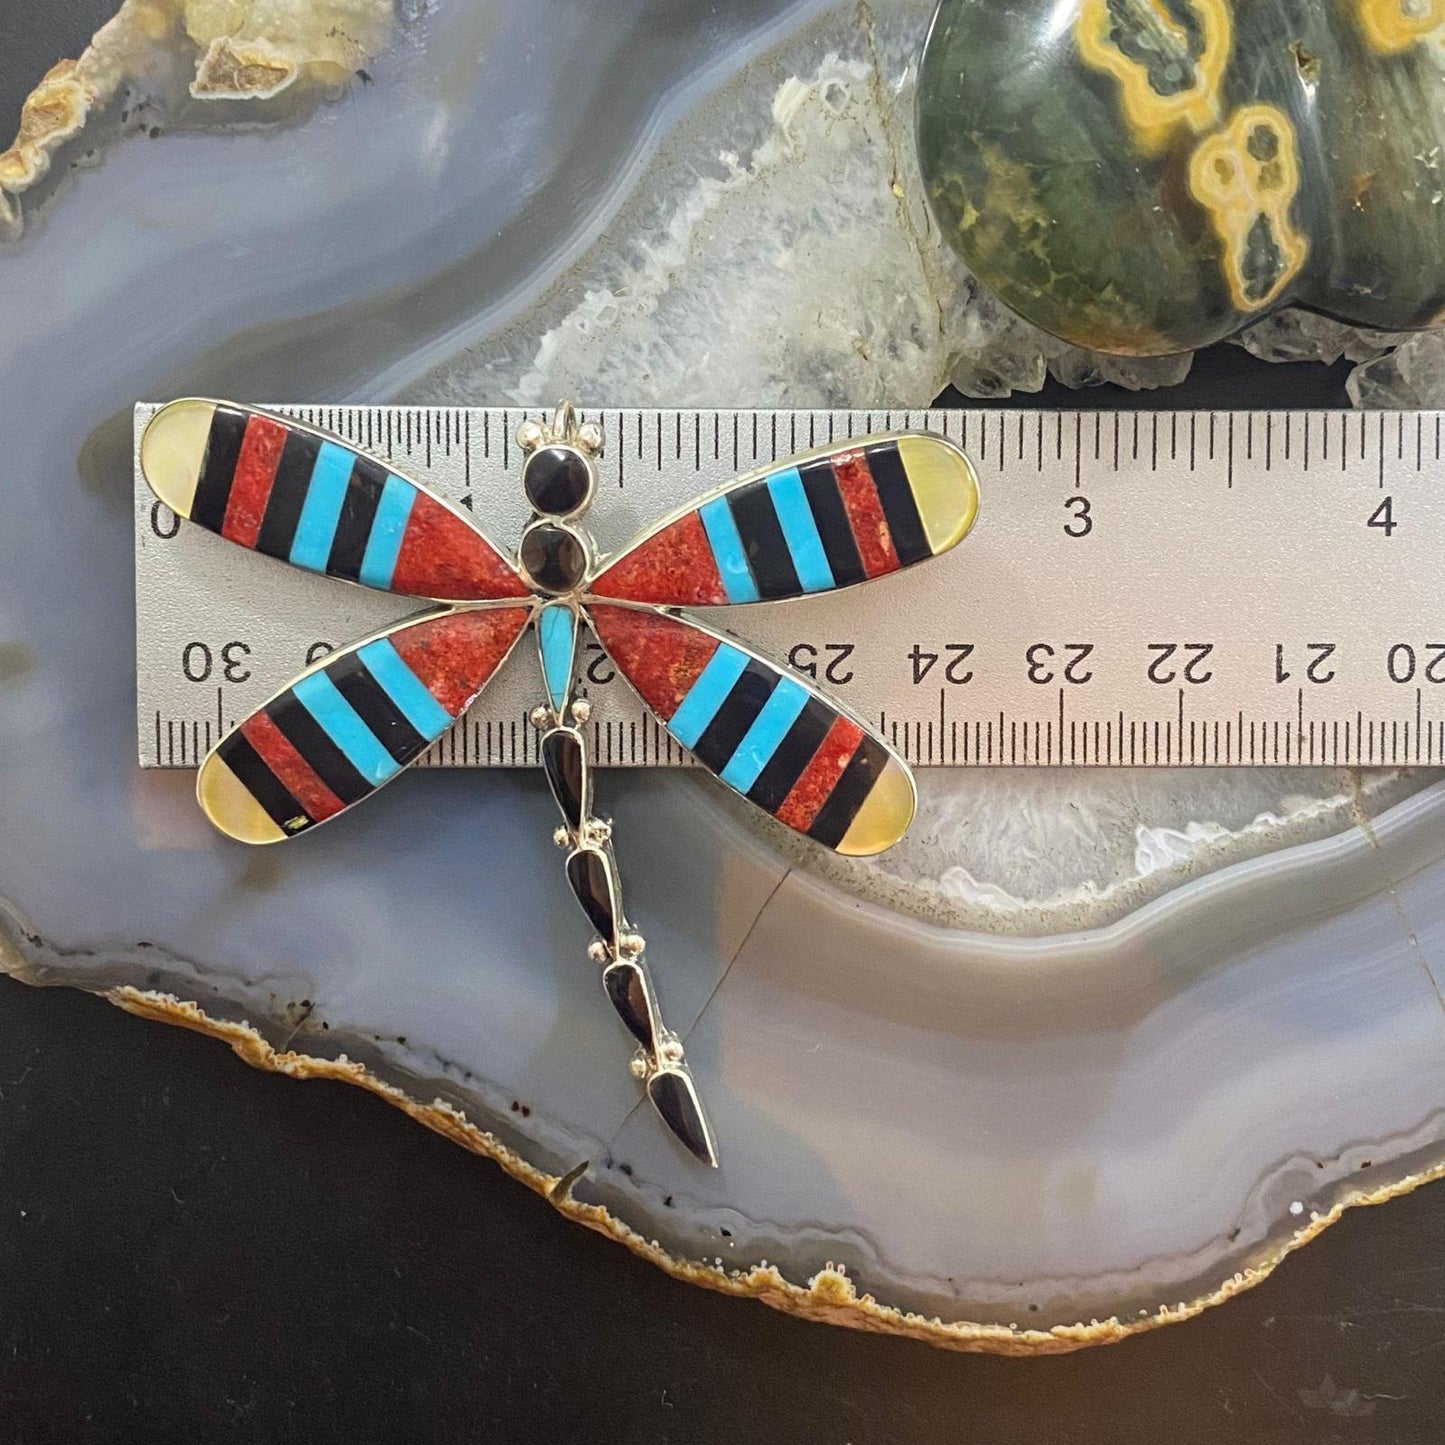 Angus Ahiyite Native American Zuni Sterling Silver Multi Stone Inlay Dragonfly Brooch/Pendant #2